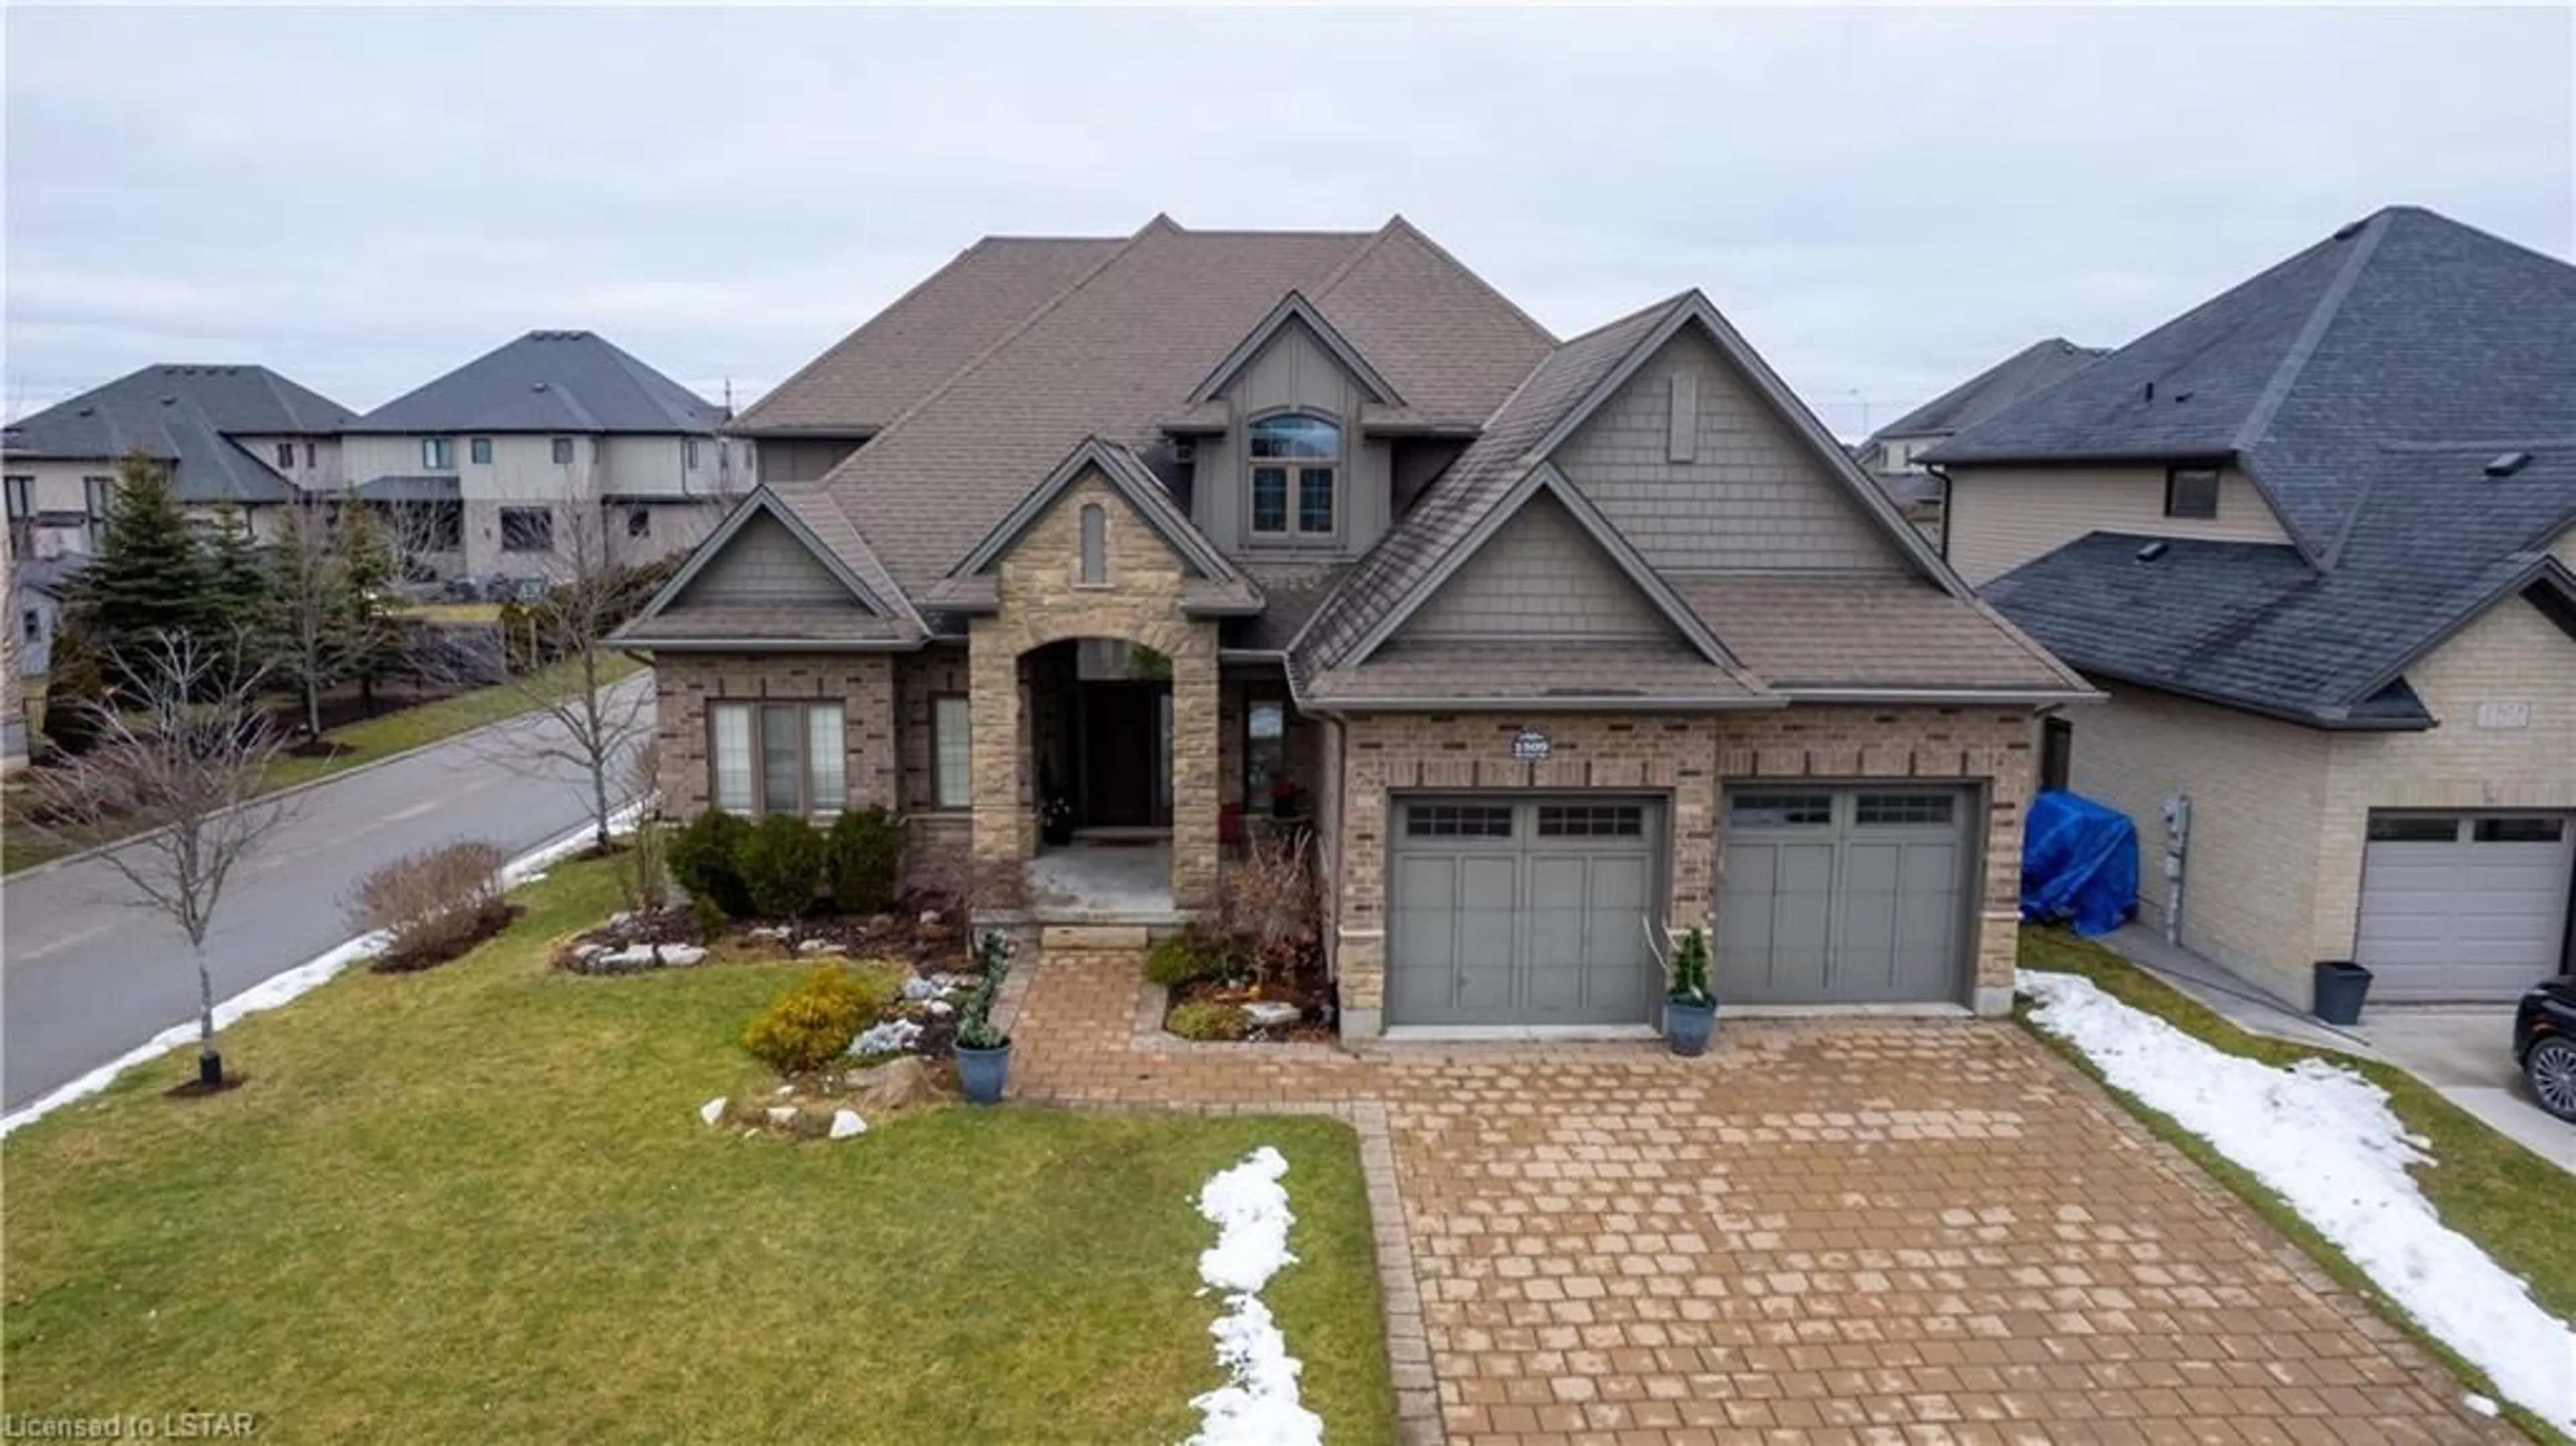 Home with brick exterior material for 1509 Jim Allen Way, London Ontario N6K 0E1